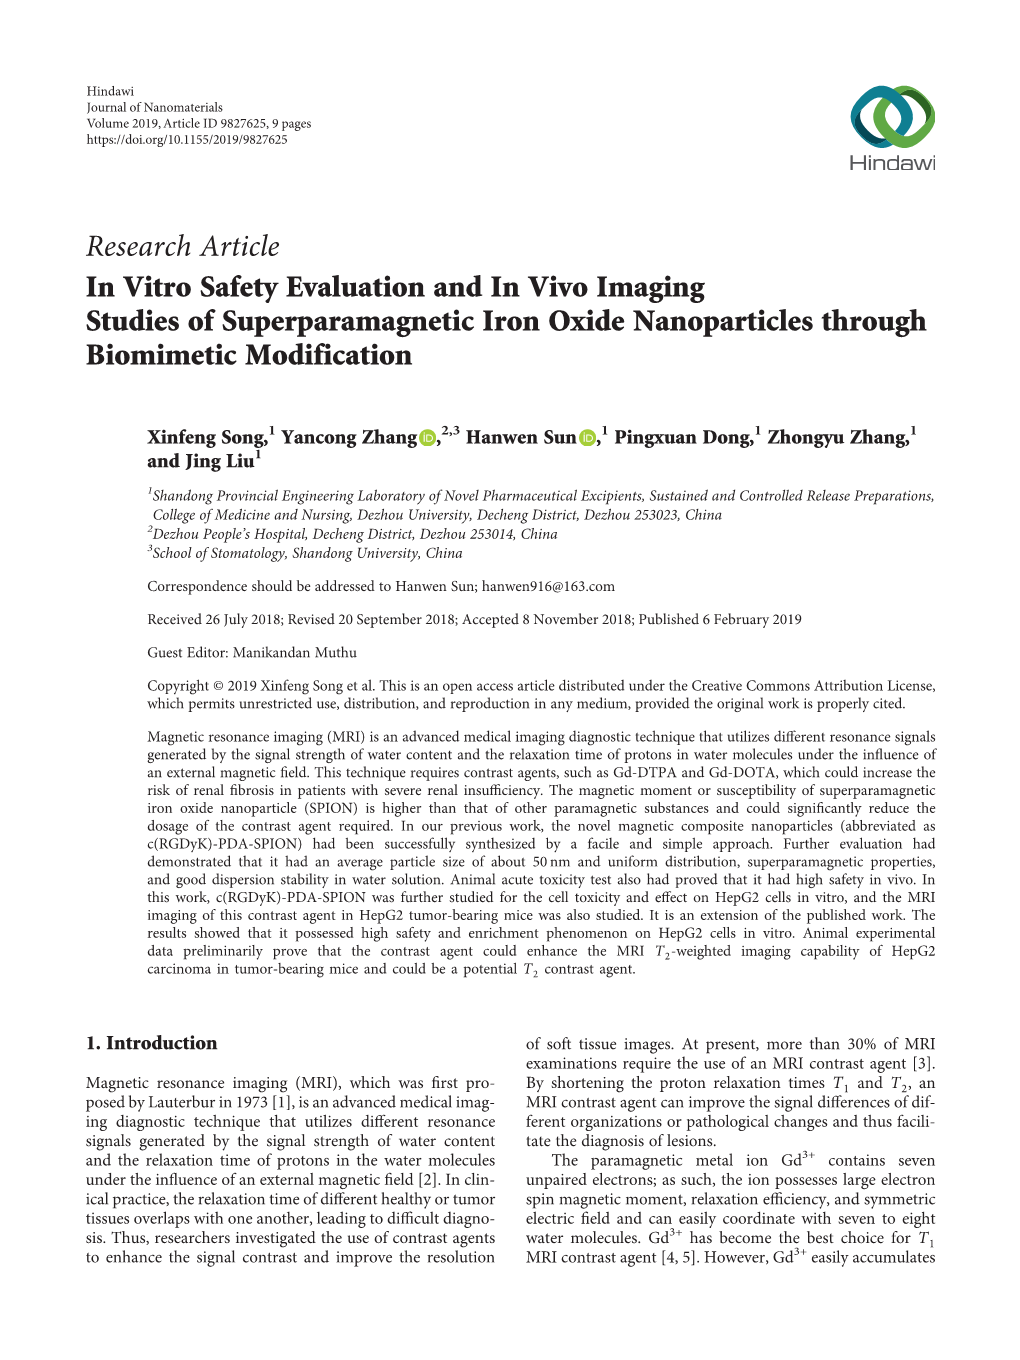 Research Article in Vitro Safety Evaluation and in Vivo Imaging Studies of Superparamagnetic Iron Oxide Nanoparticles Through Biomimetic Modification